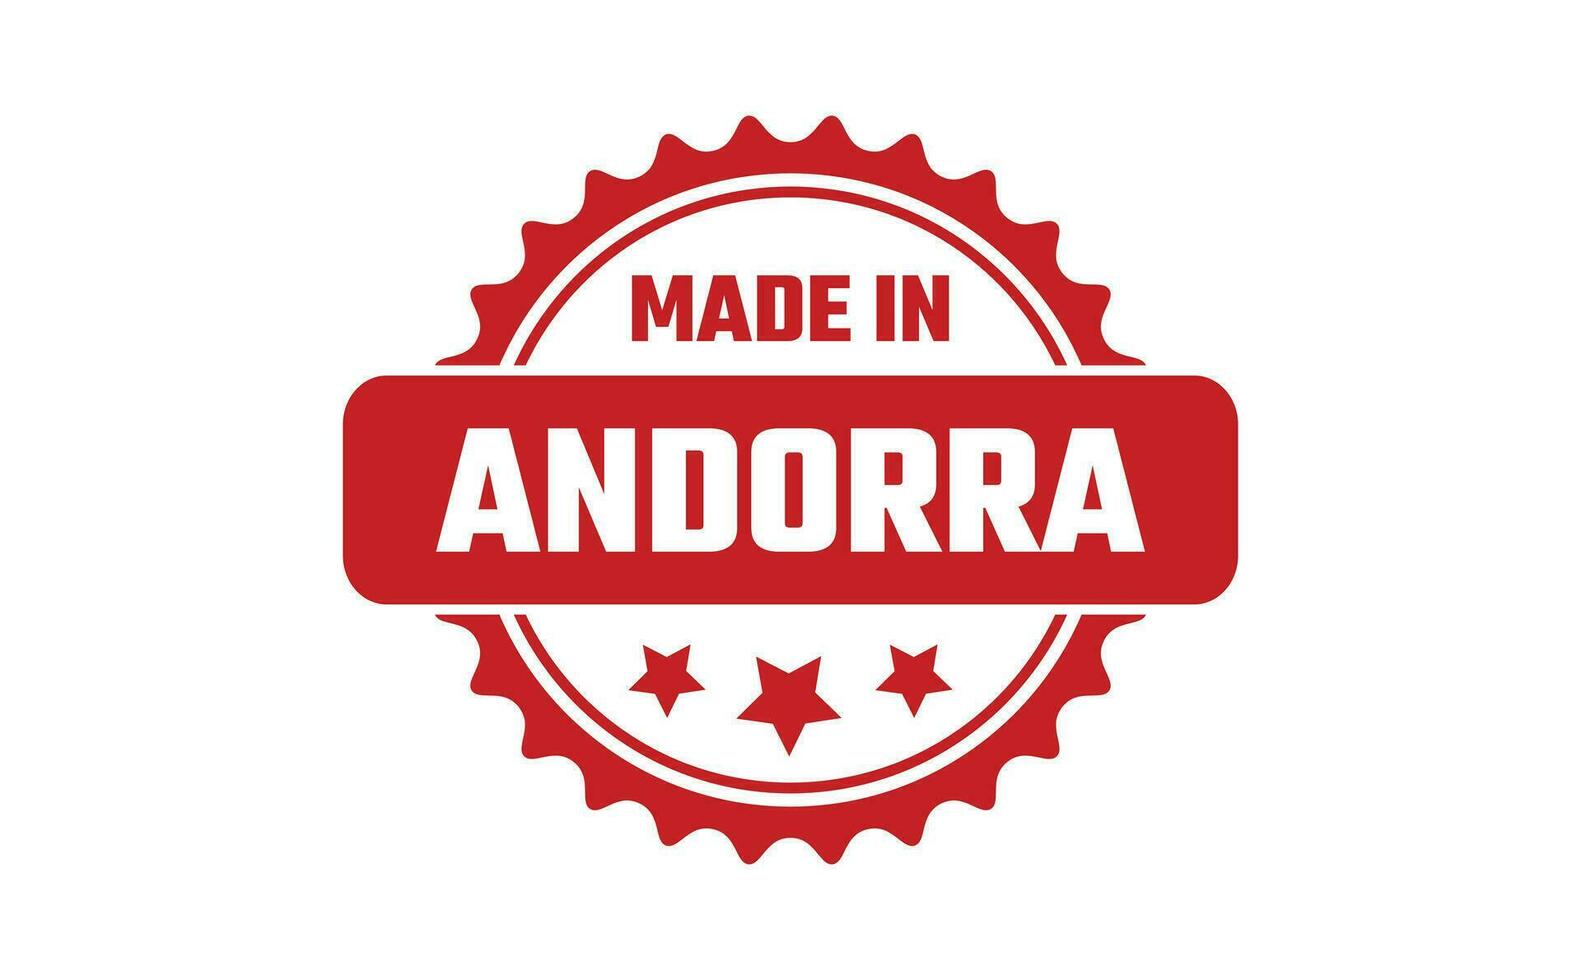 Made In Andorra Rubber Stamp vector